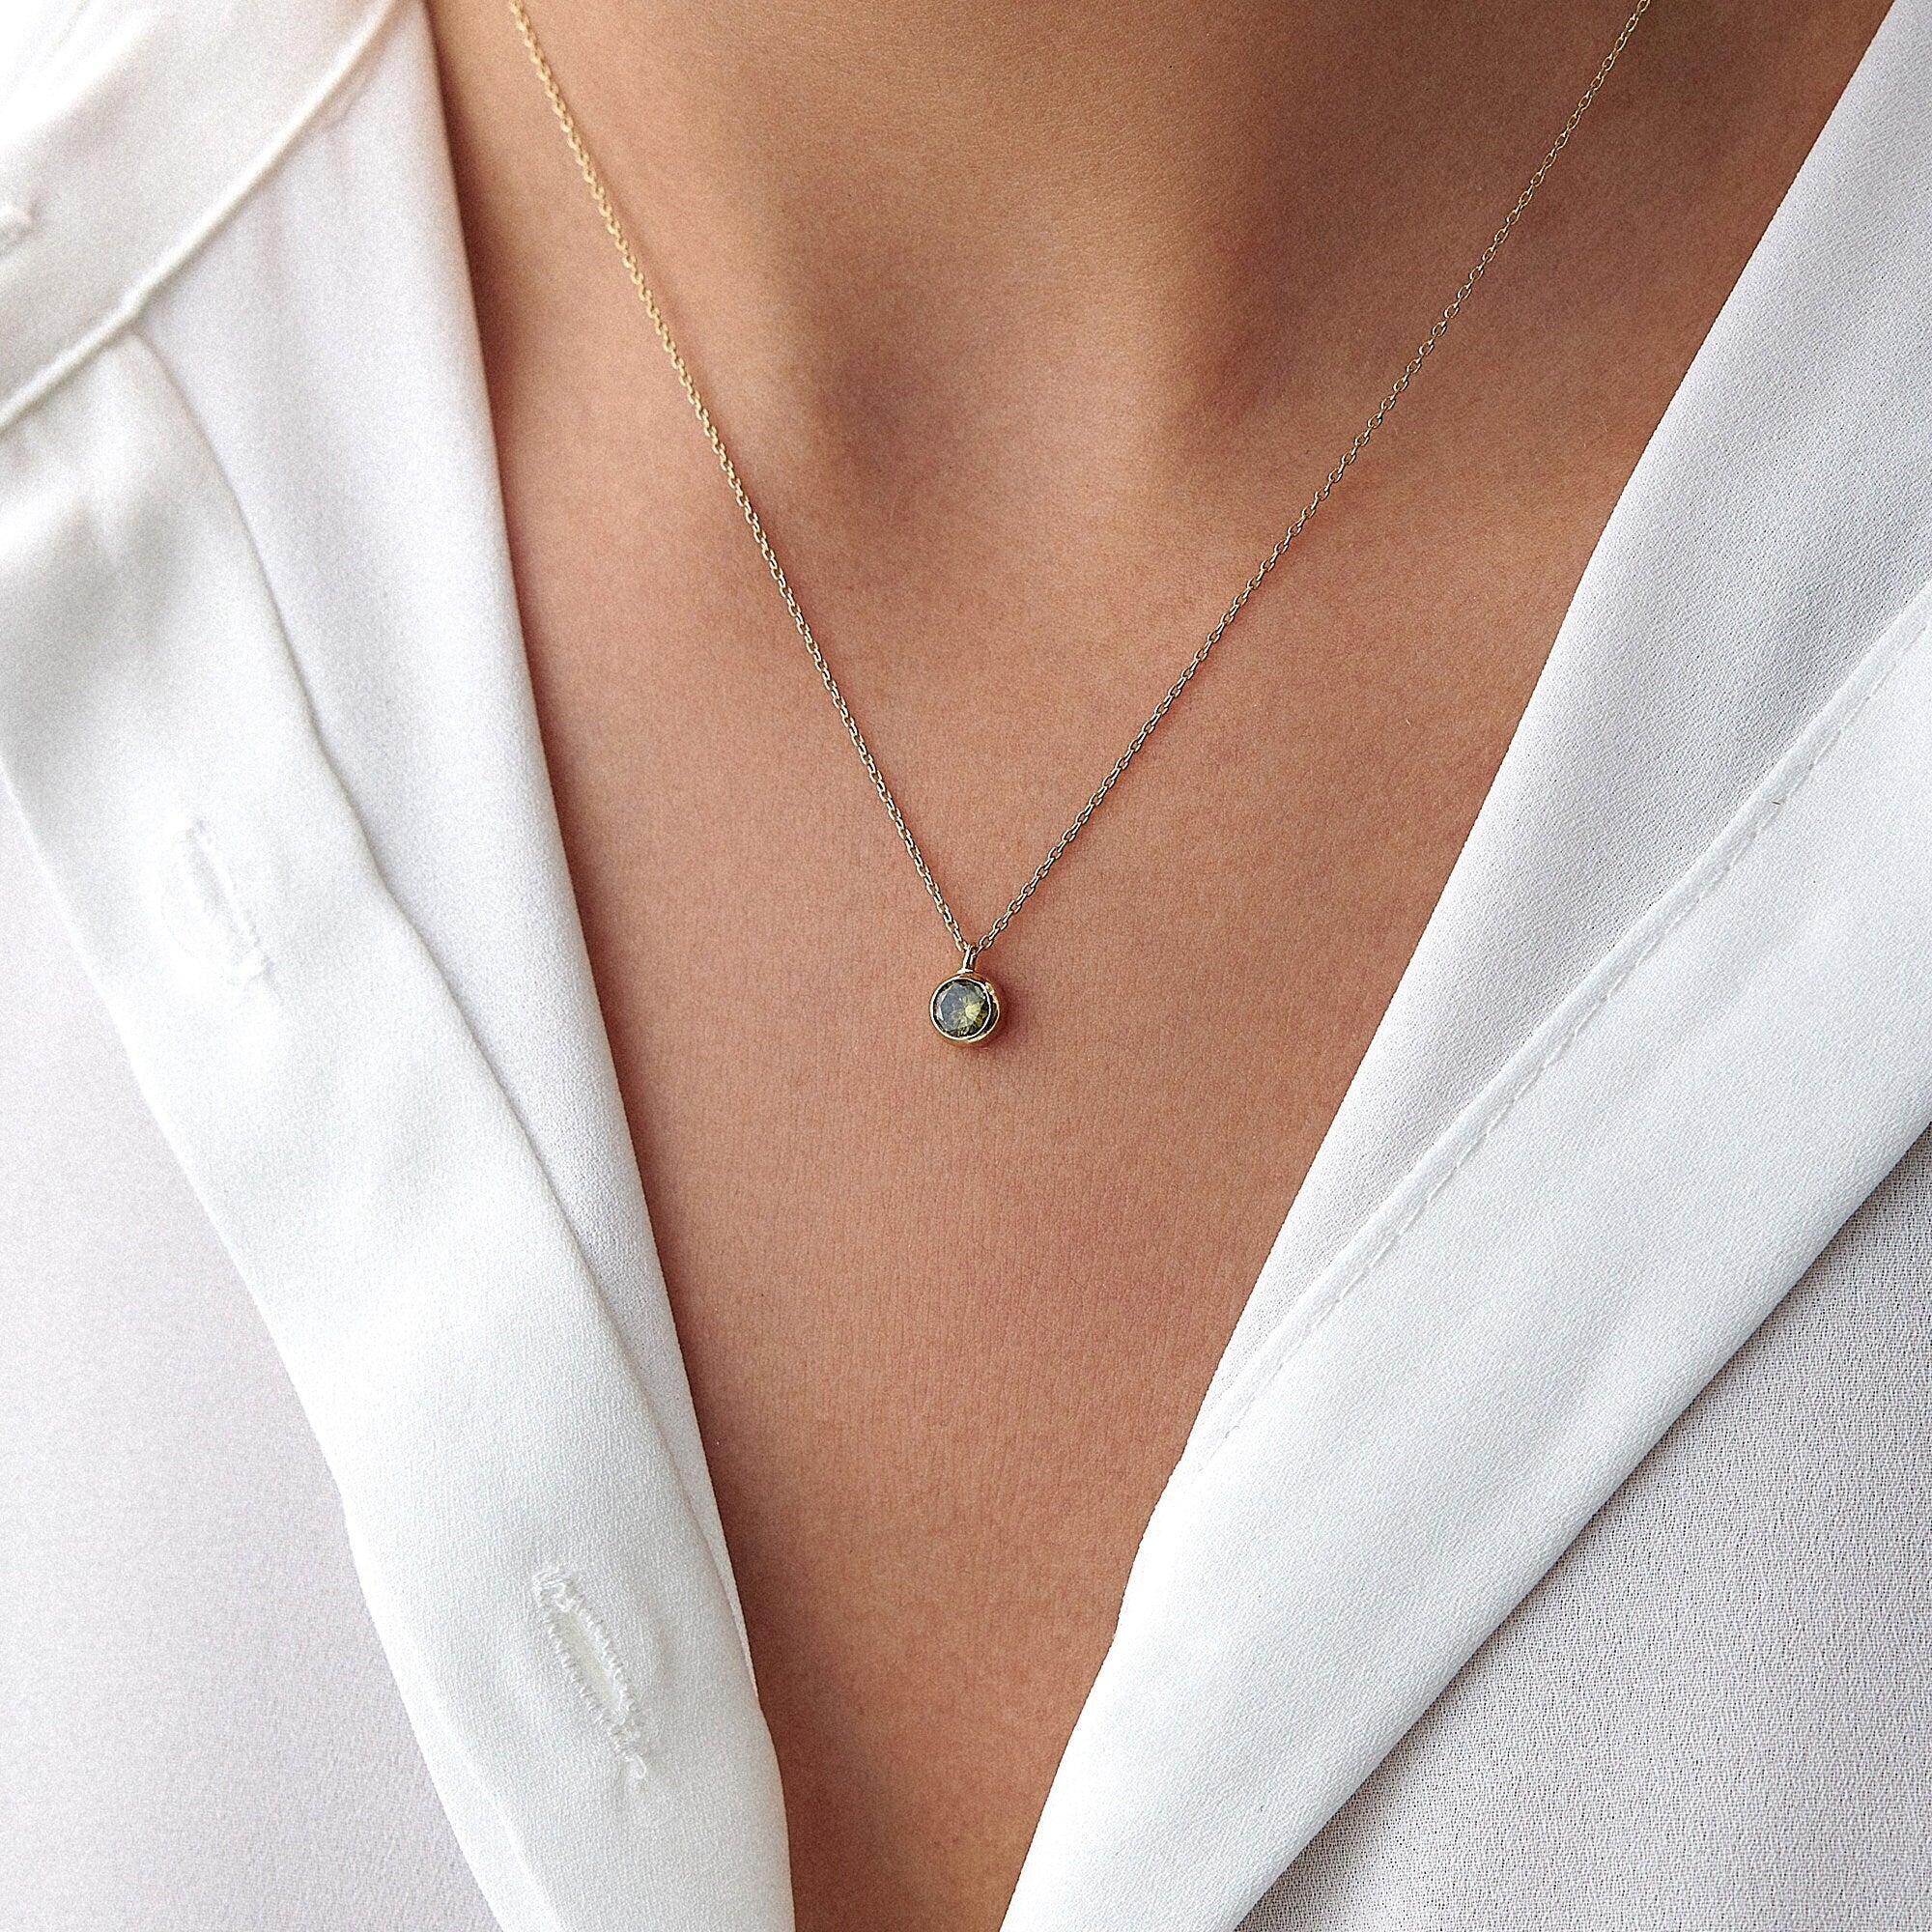 BEZEL SET PERIDOT NECKLACE AVAILABLE IN 14K AND 18K GOLD, AUGUST BIRTHSTONE NECKLACE